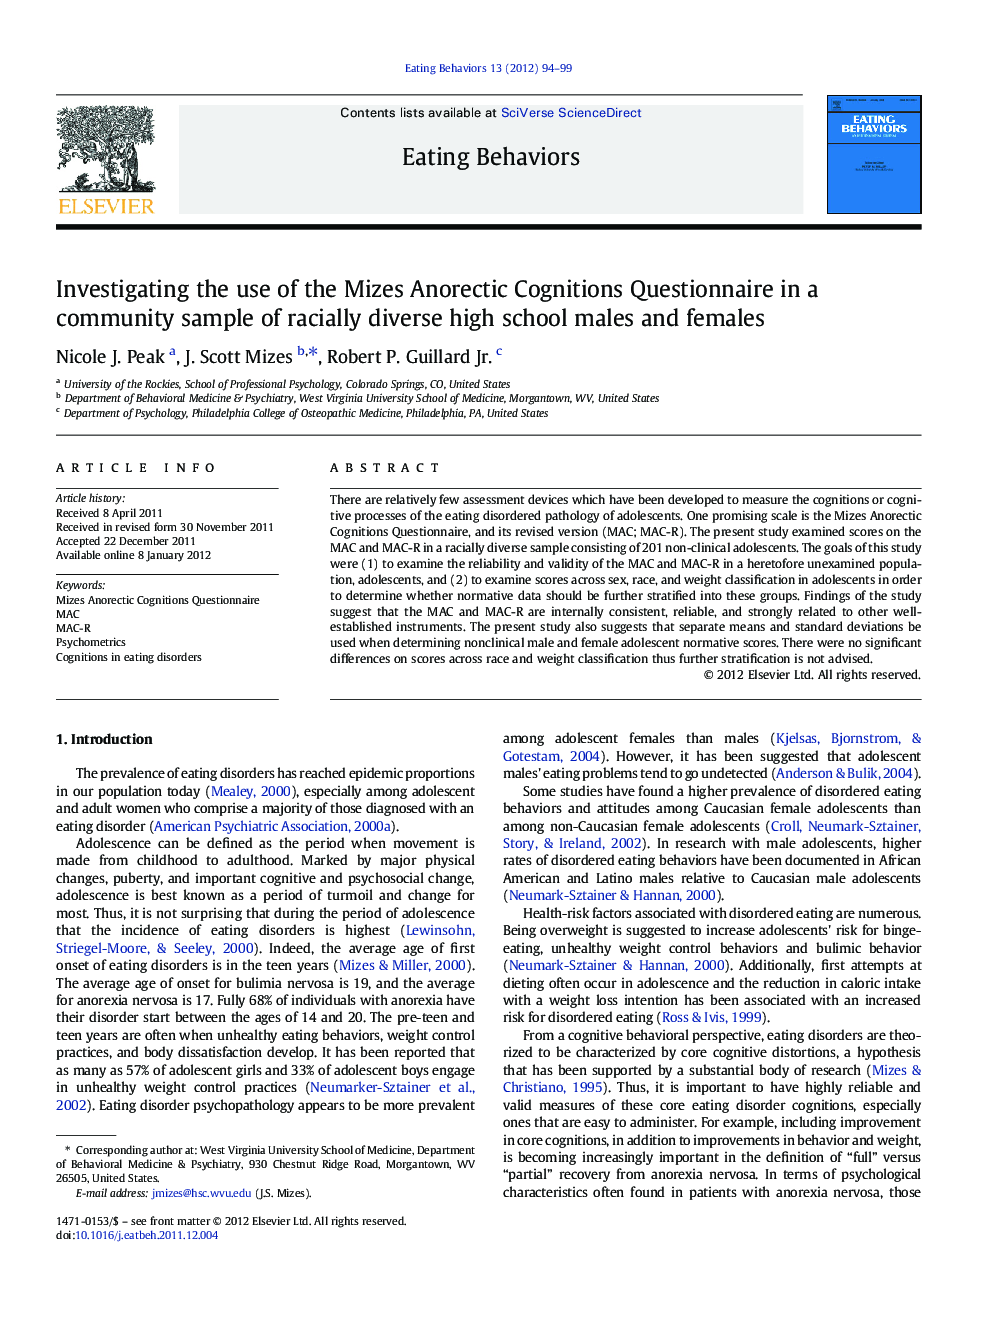 Investigating the use of the Mizes Anorectic Cognitions Questionnaire in a community sample of racially diverse high school males and females